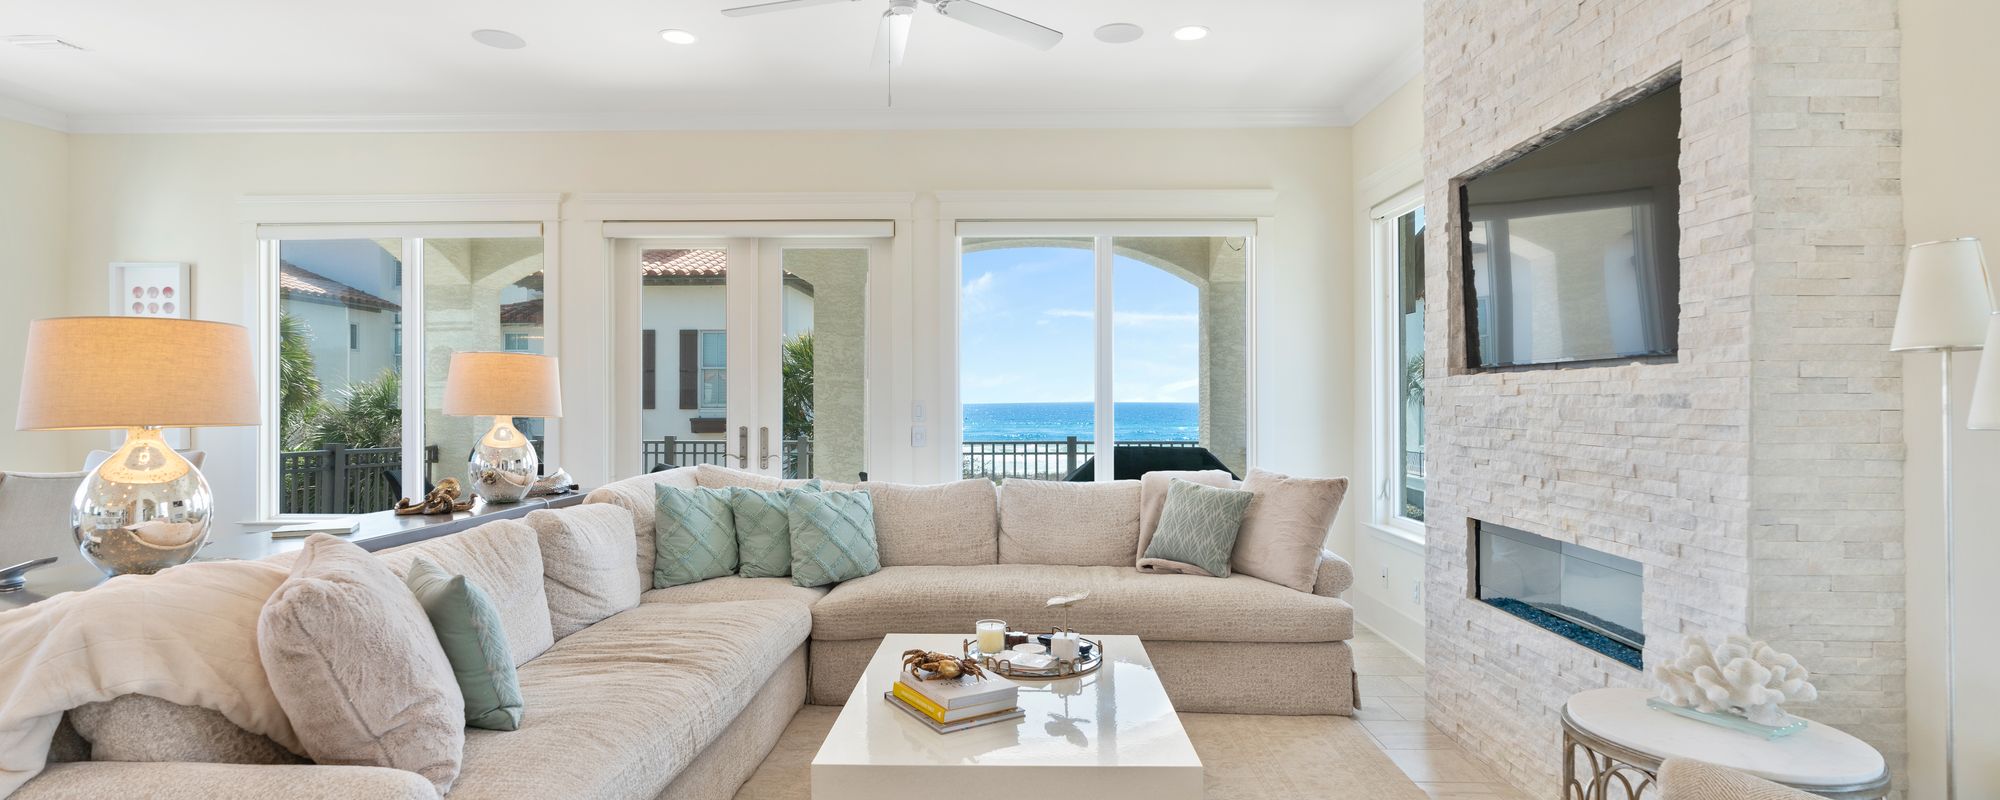 Coastal chic living space in a vacation rental managed by Scenic Stays.